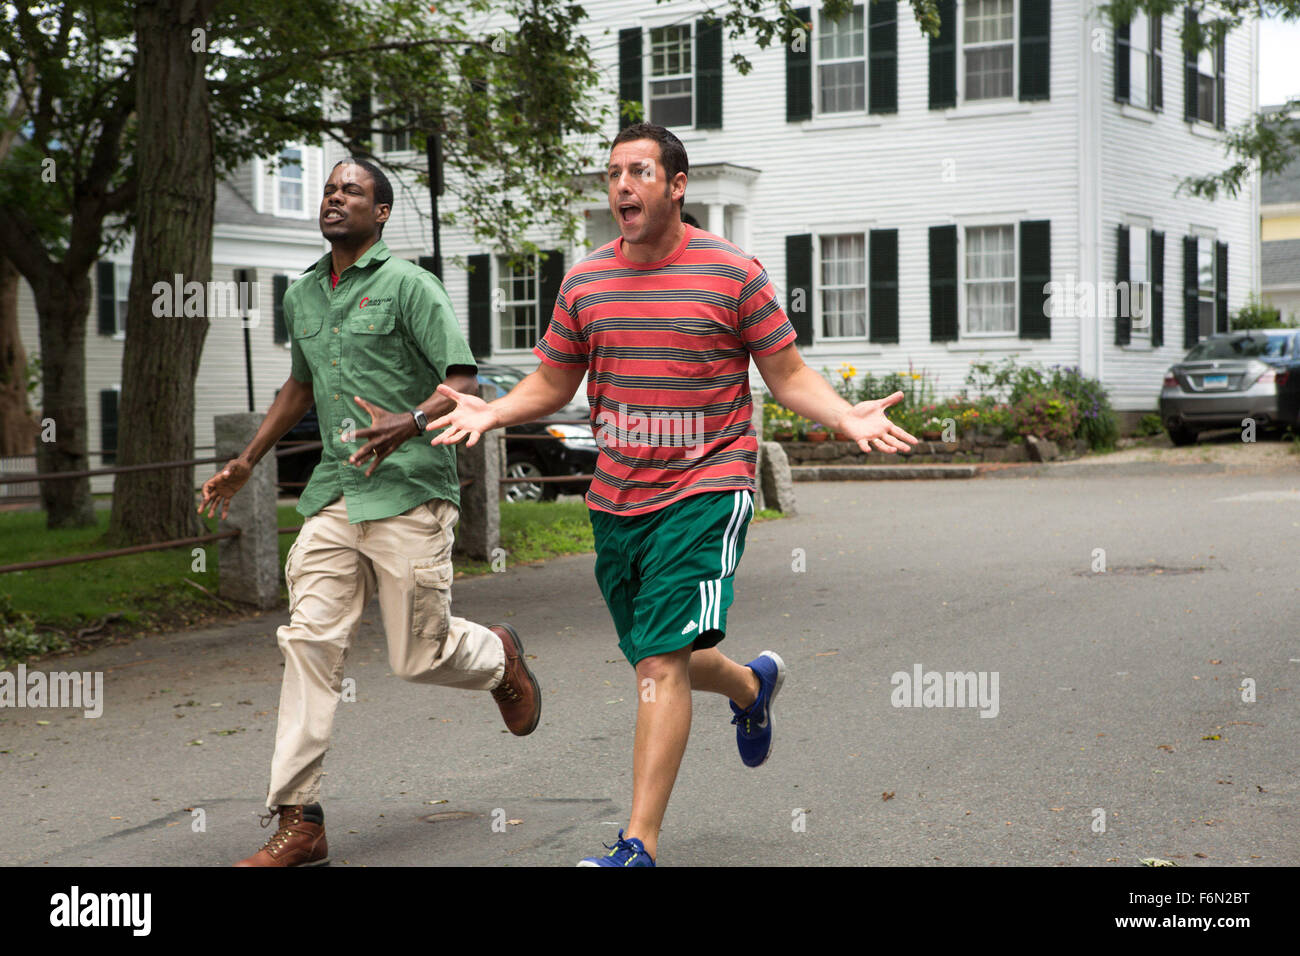 RELEASE DATE: July 12, 2013 TITLE: Grown Ups 2 STUDIO: Columbia Pictures DIRECTOR: Dennis Dugan PLOT: After moving his family back to his hometown to be with his friends and their kids, Lenny (Adam Sandler), finds out that between old bullies, new bullies, schizo bus drivers, drunk cops on skis, and 400 costumed party crashers sometimes crazy follows you PICTURED: CHRIS ROCK as Kurt McKenzie and ADAM SANDLER as Lenny Feder (Credit: c Columbia Pictures/Entertainment Pictures) Stock Photo